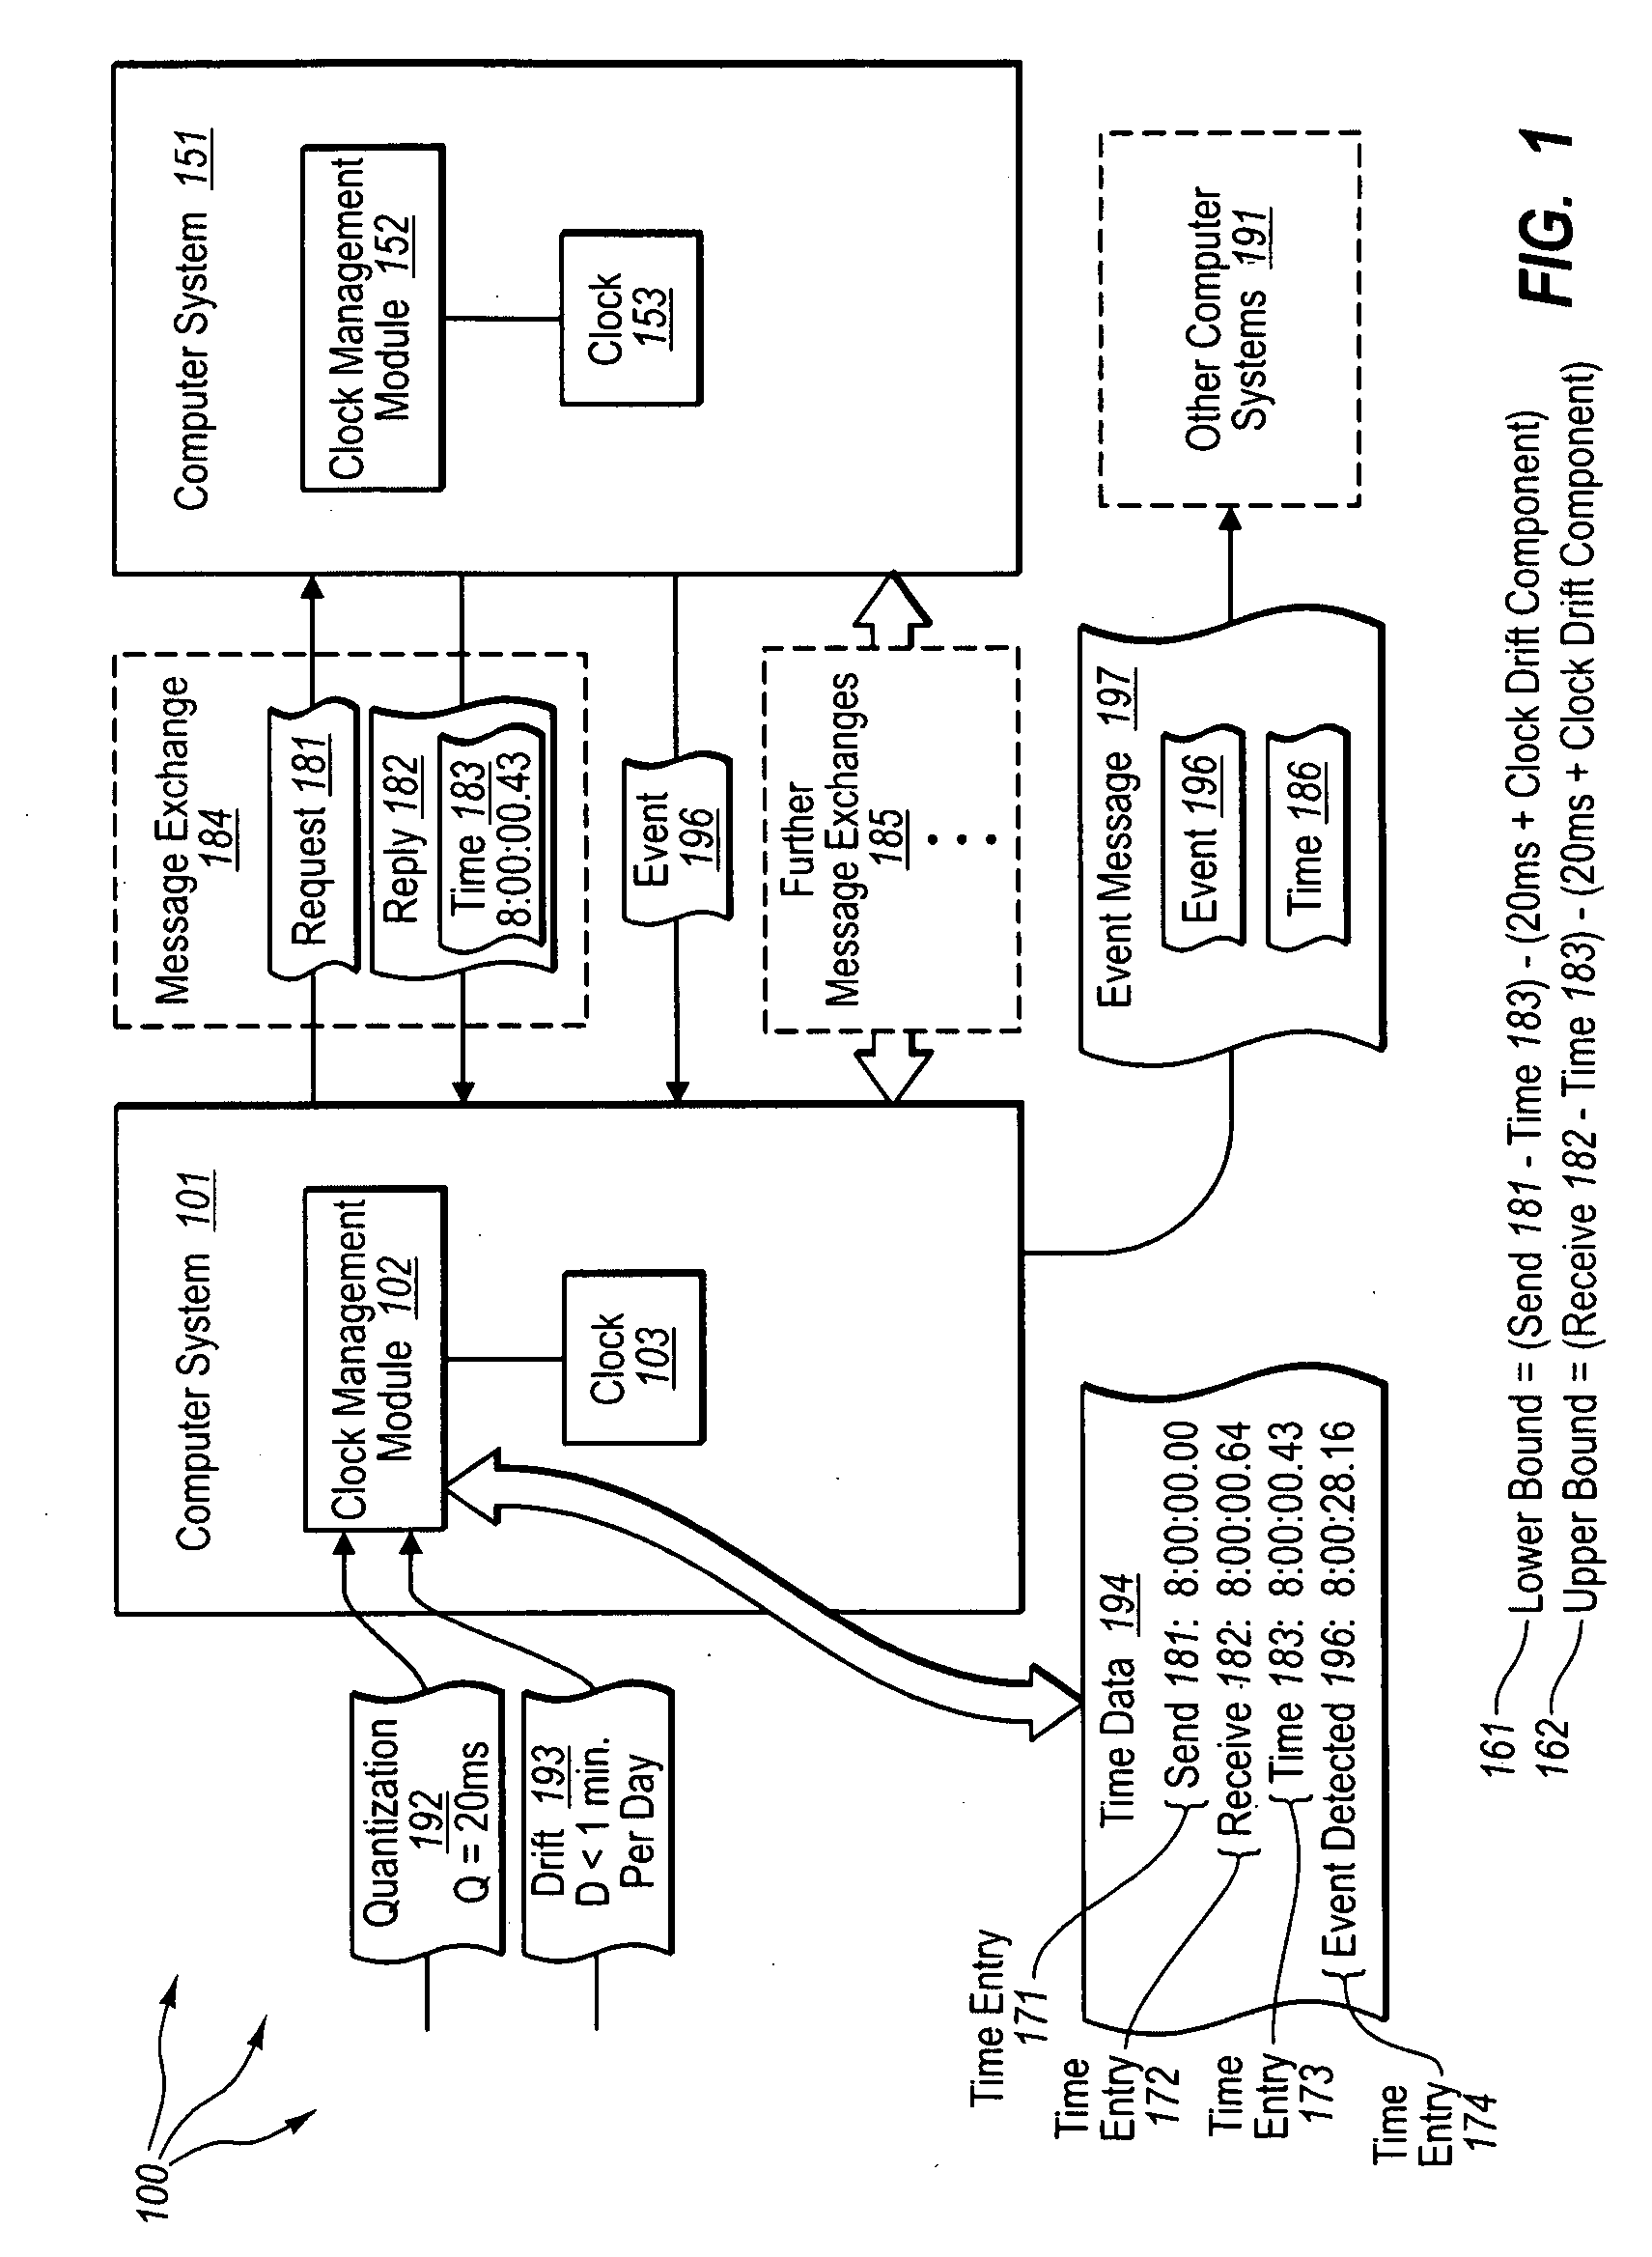 Synchronizing clocks in an asynchronous distributed system